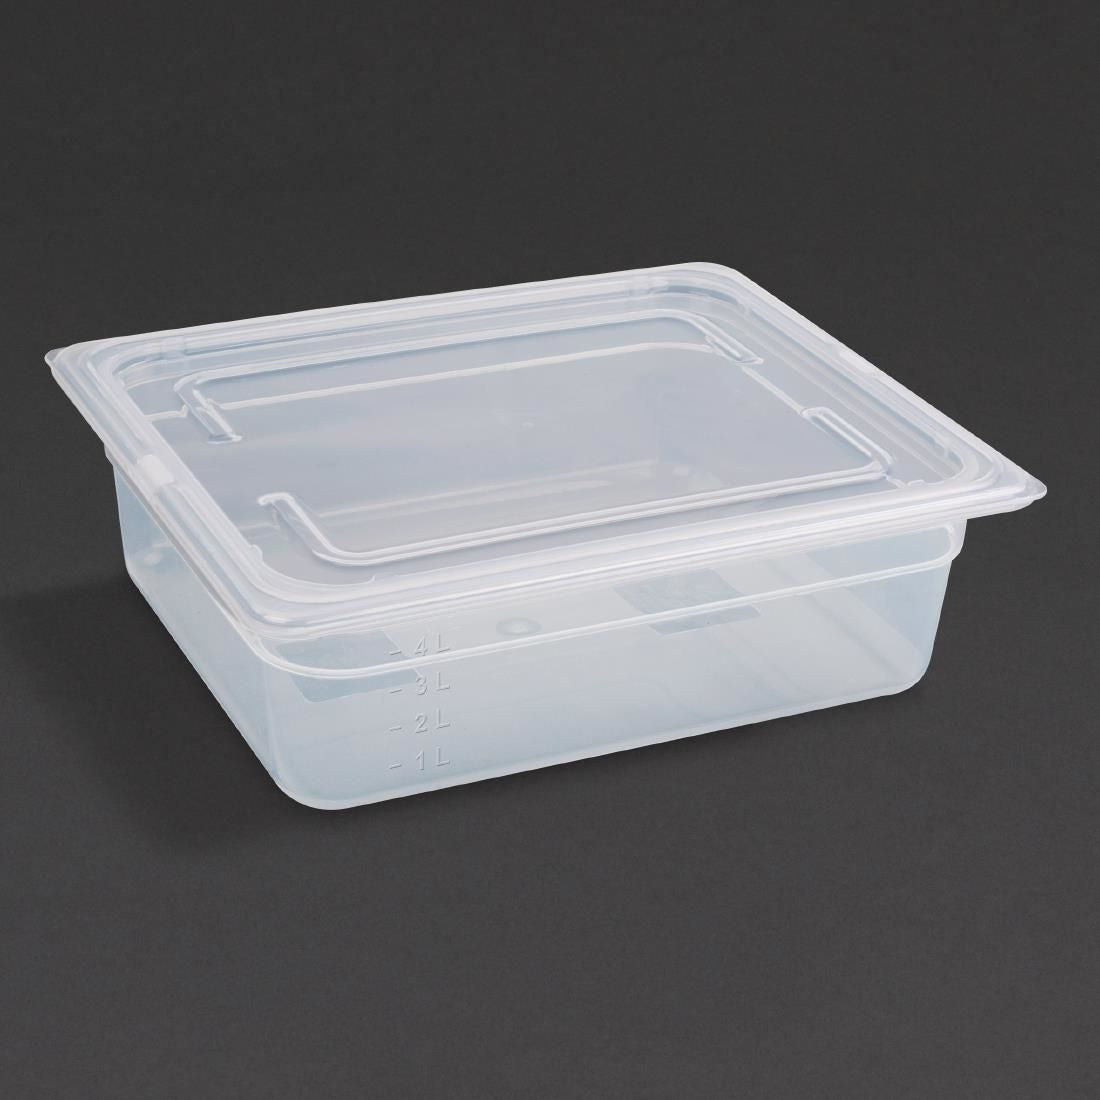 GJ515 Vogue Polypropylene 1/2 Gastronorm Container with Lid 100mm (Pack of 4) JD Catering Equipment Solutions Ltd